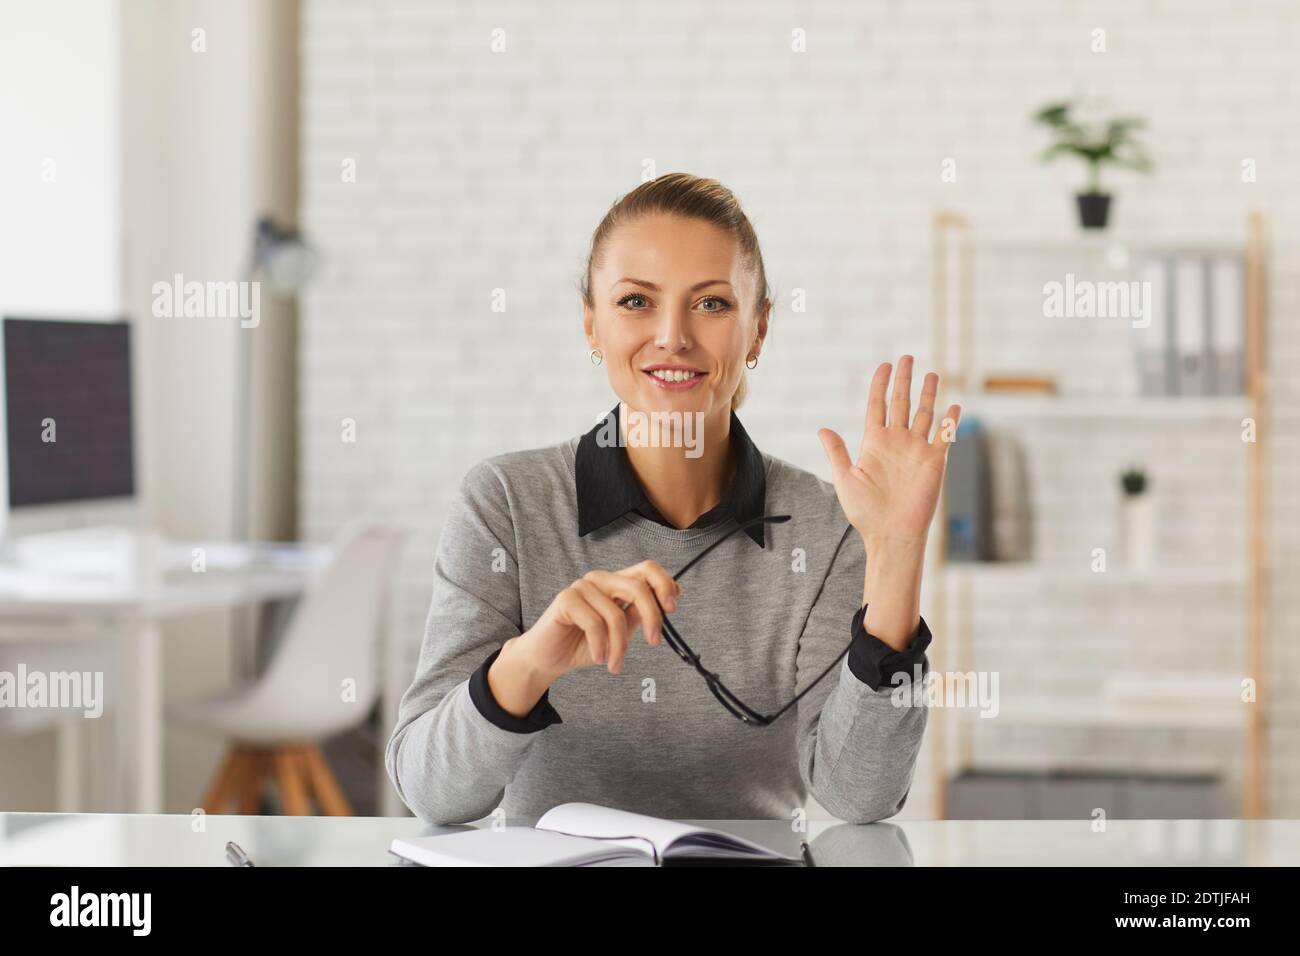 Happy teacher, student or businesswoman sitting at desk and waving hand at camera Stock Photo